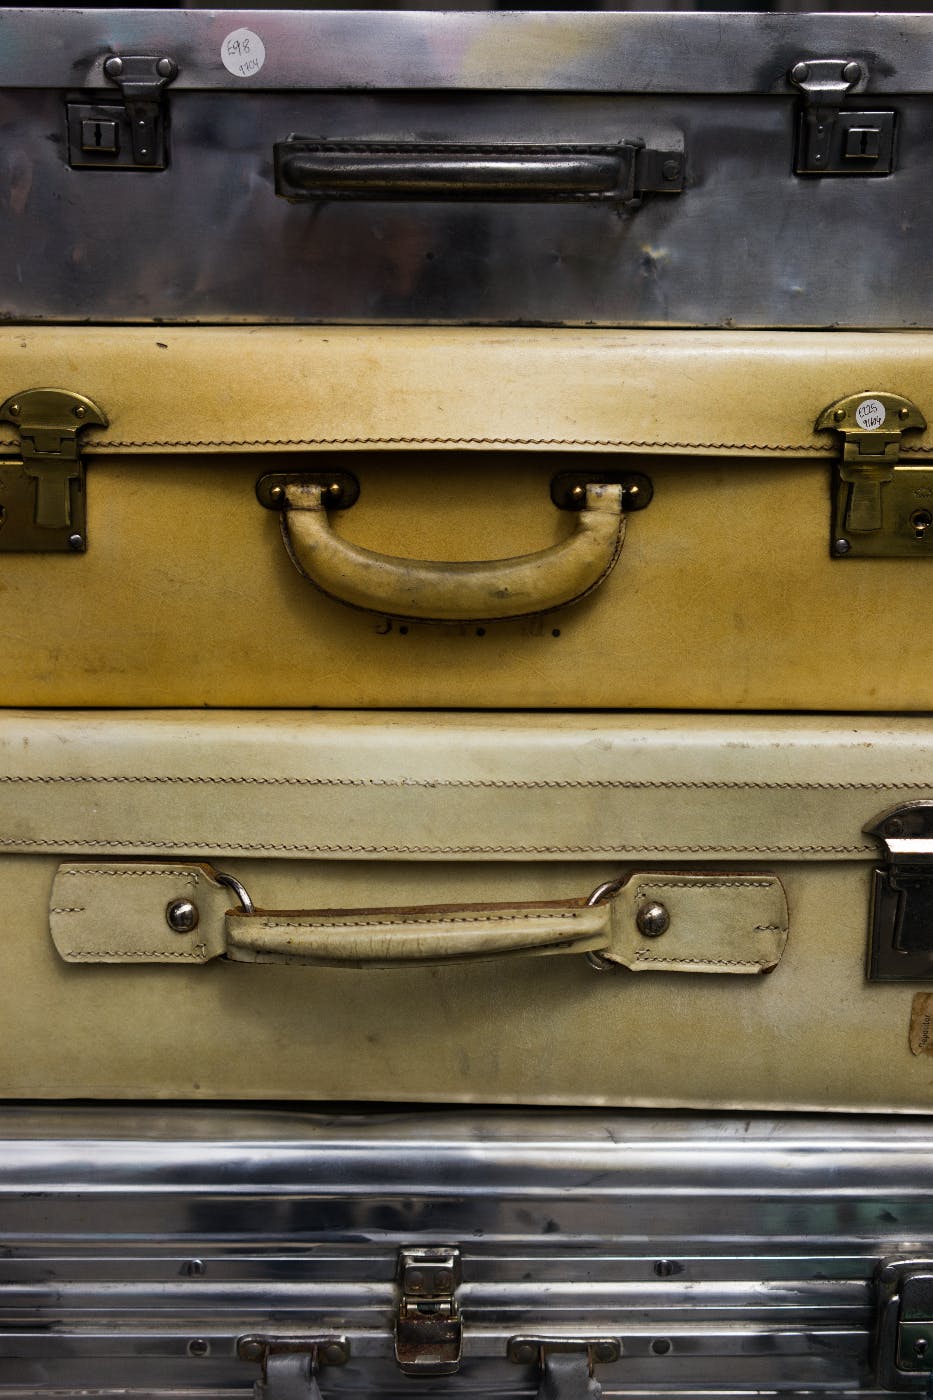 A stack of suitcases, handles facing the camera